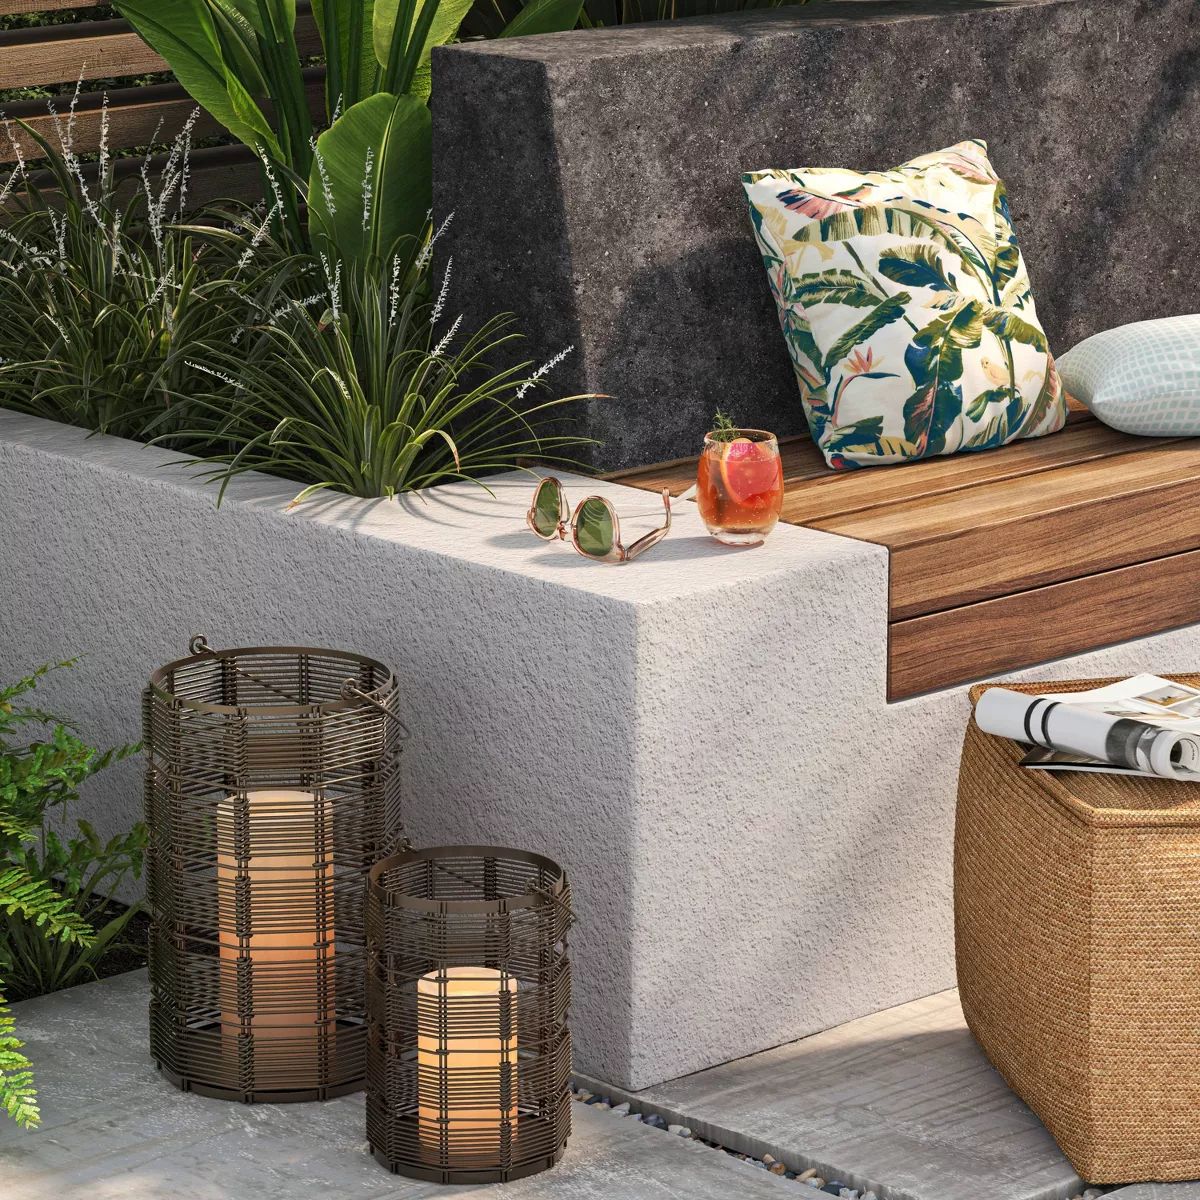 Metal and Wicker Woven Round Battery LED Outdoor Lantern Assorted Grays - Threshold™ | Target